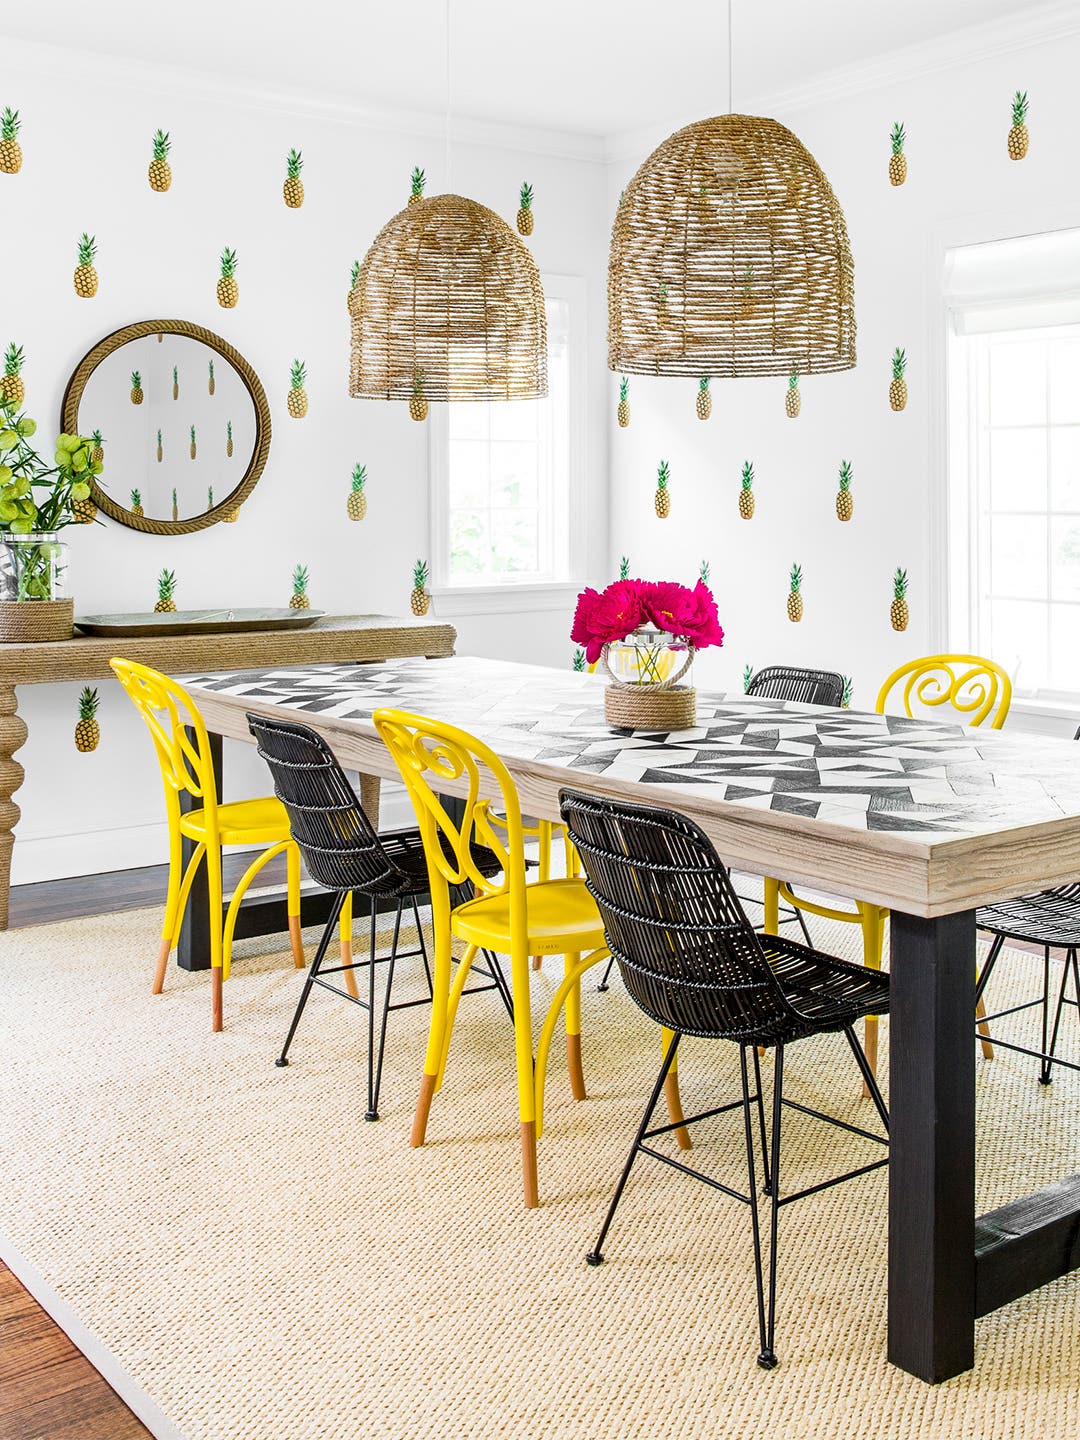 dining room with pineapple decals on wall and yellow chairs